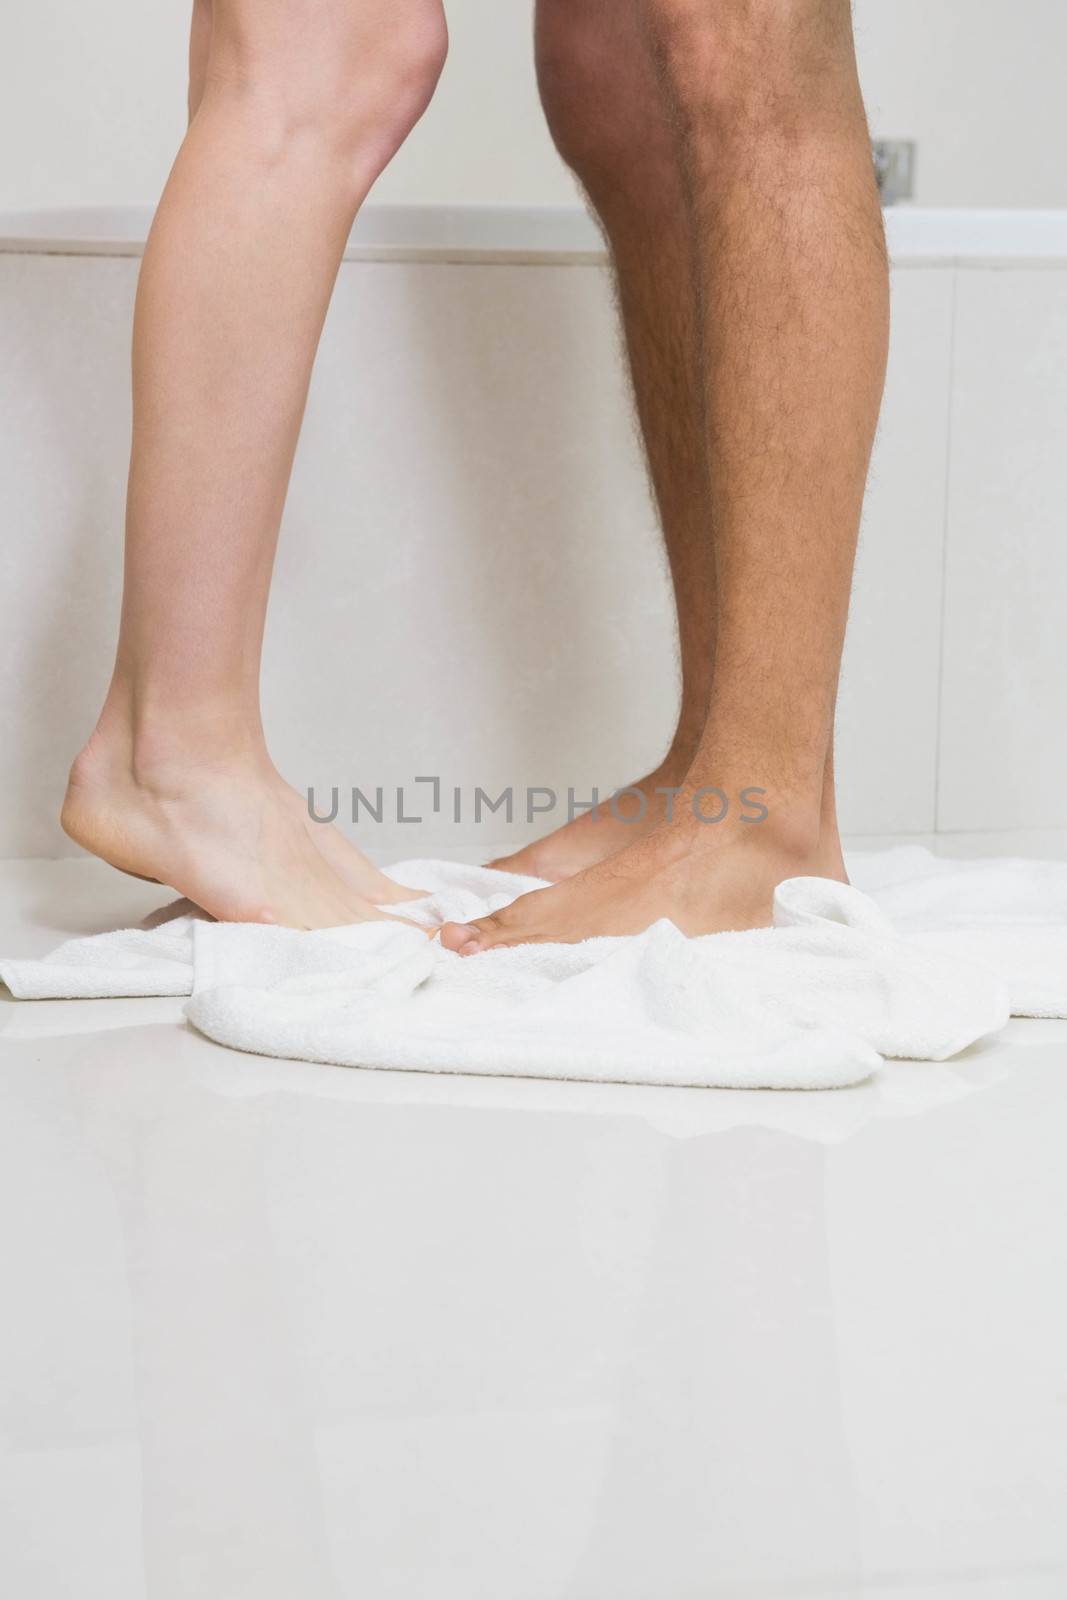 Young couple bathing together in bathtub by Wavebreakmedia